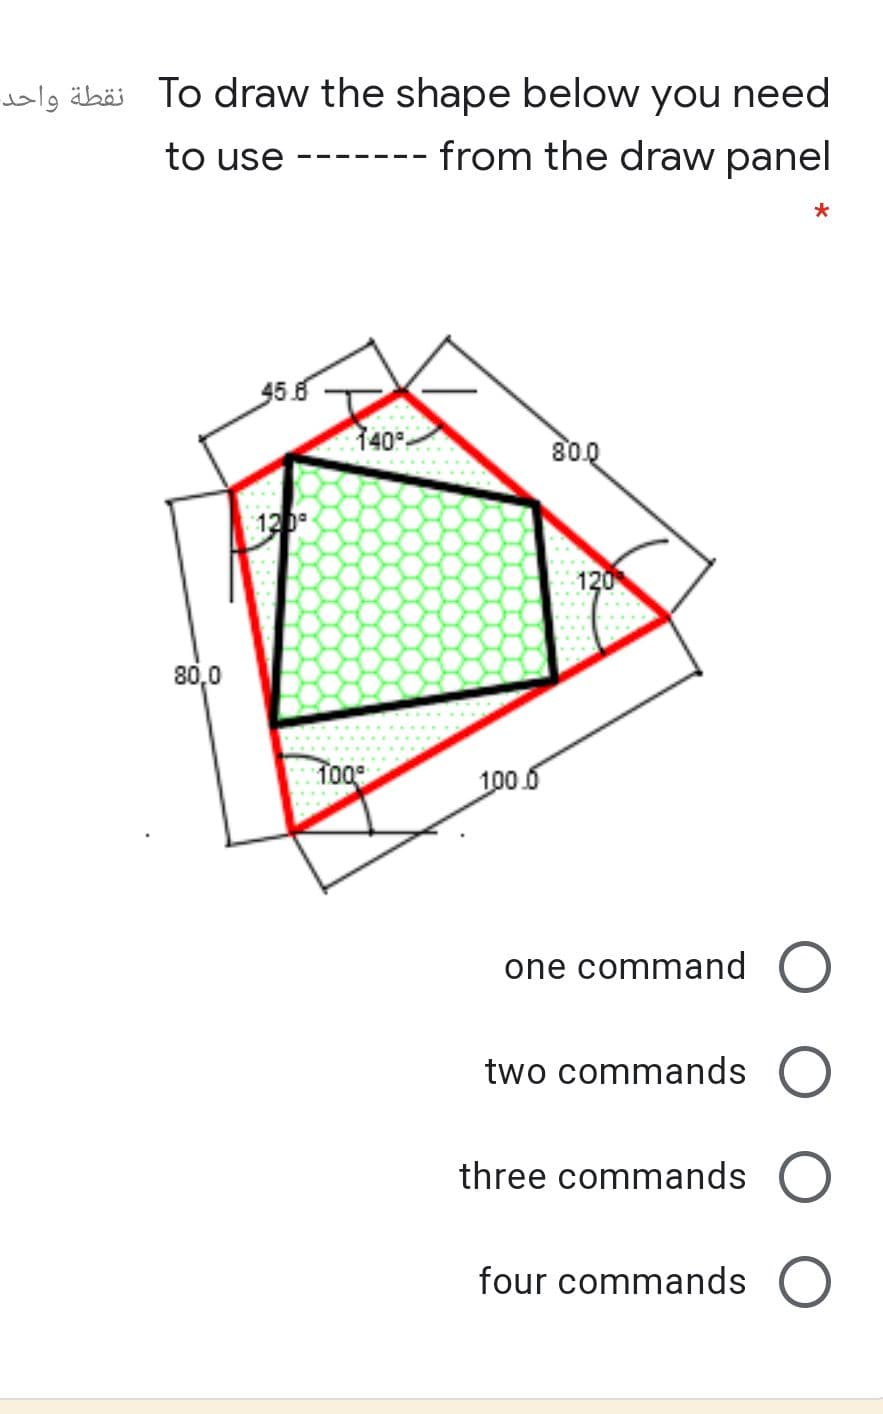 wlg äbäö To draw the shape below you need
-- from the draw panel
to use
- - ---
35.6
140°.
80.0
120
120
80,0
Tog
100.6
one command O
two commands
three commands
four commands
